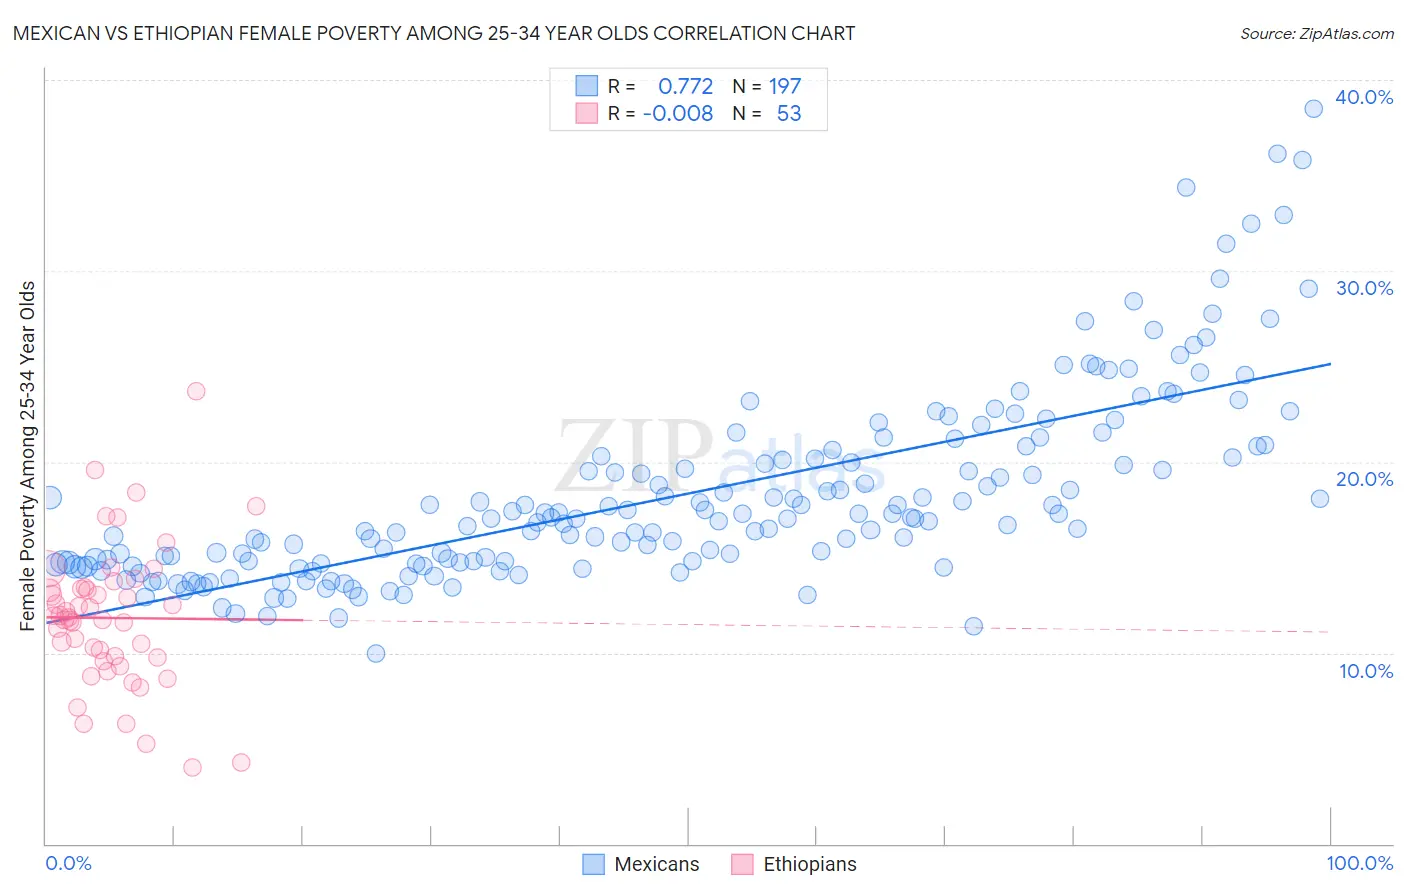 Mexican vs Ethiopian Female Poverty Among 25-34 Year Olds